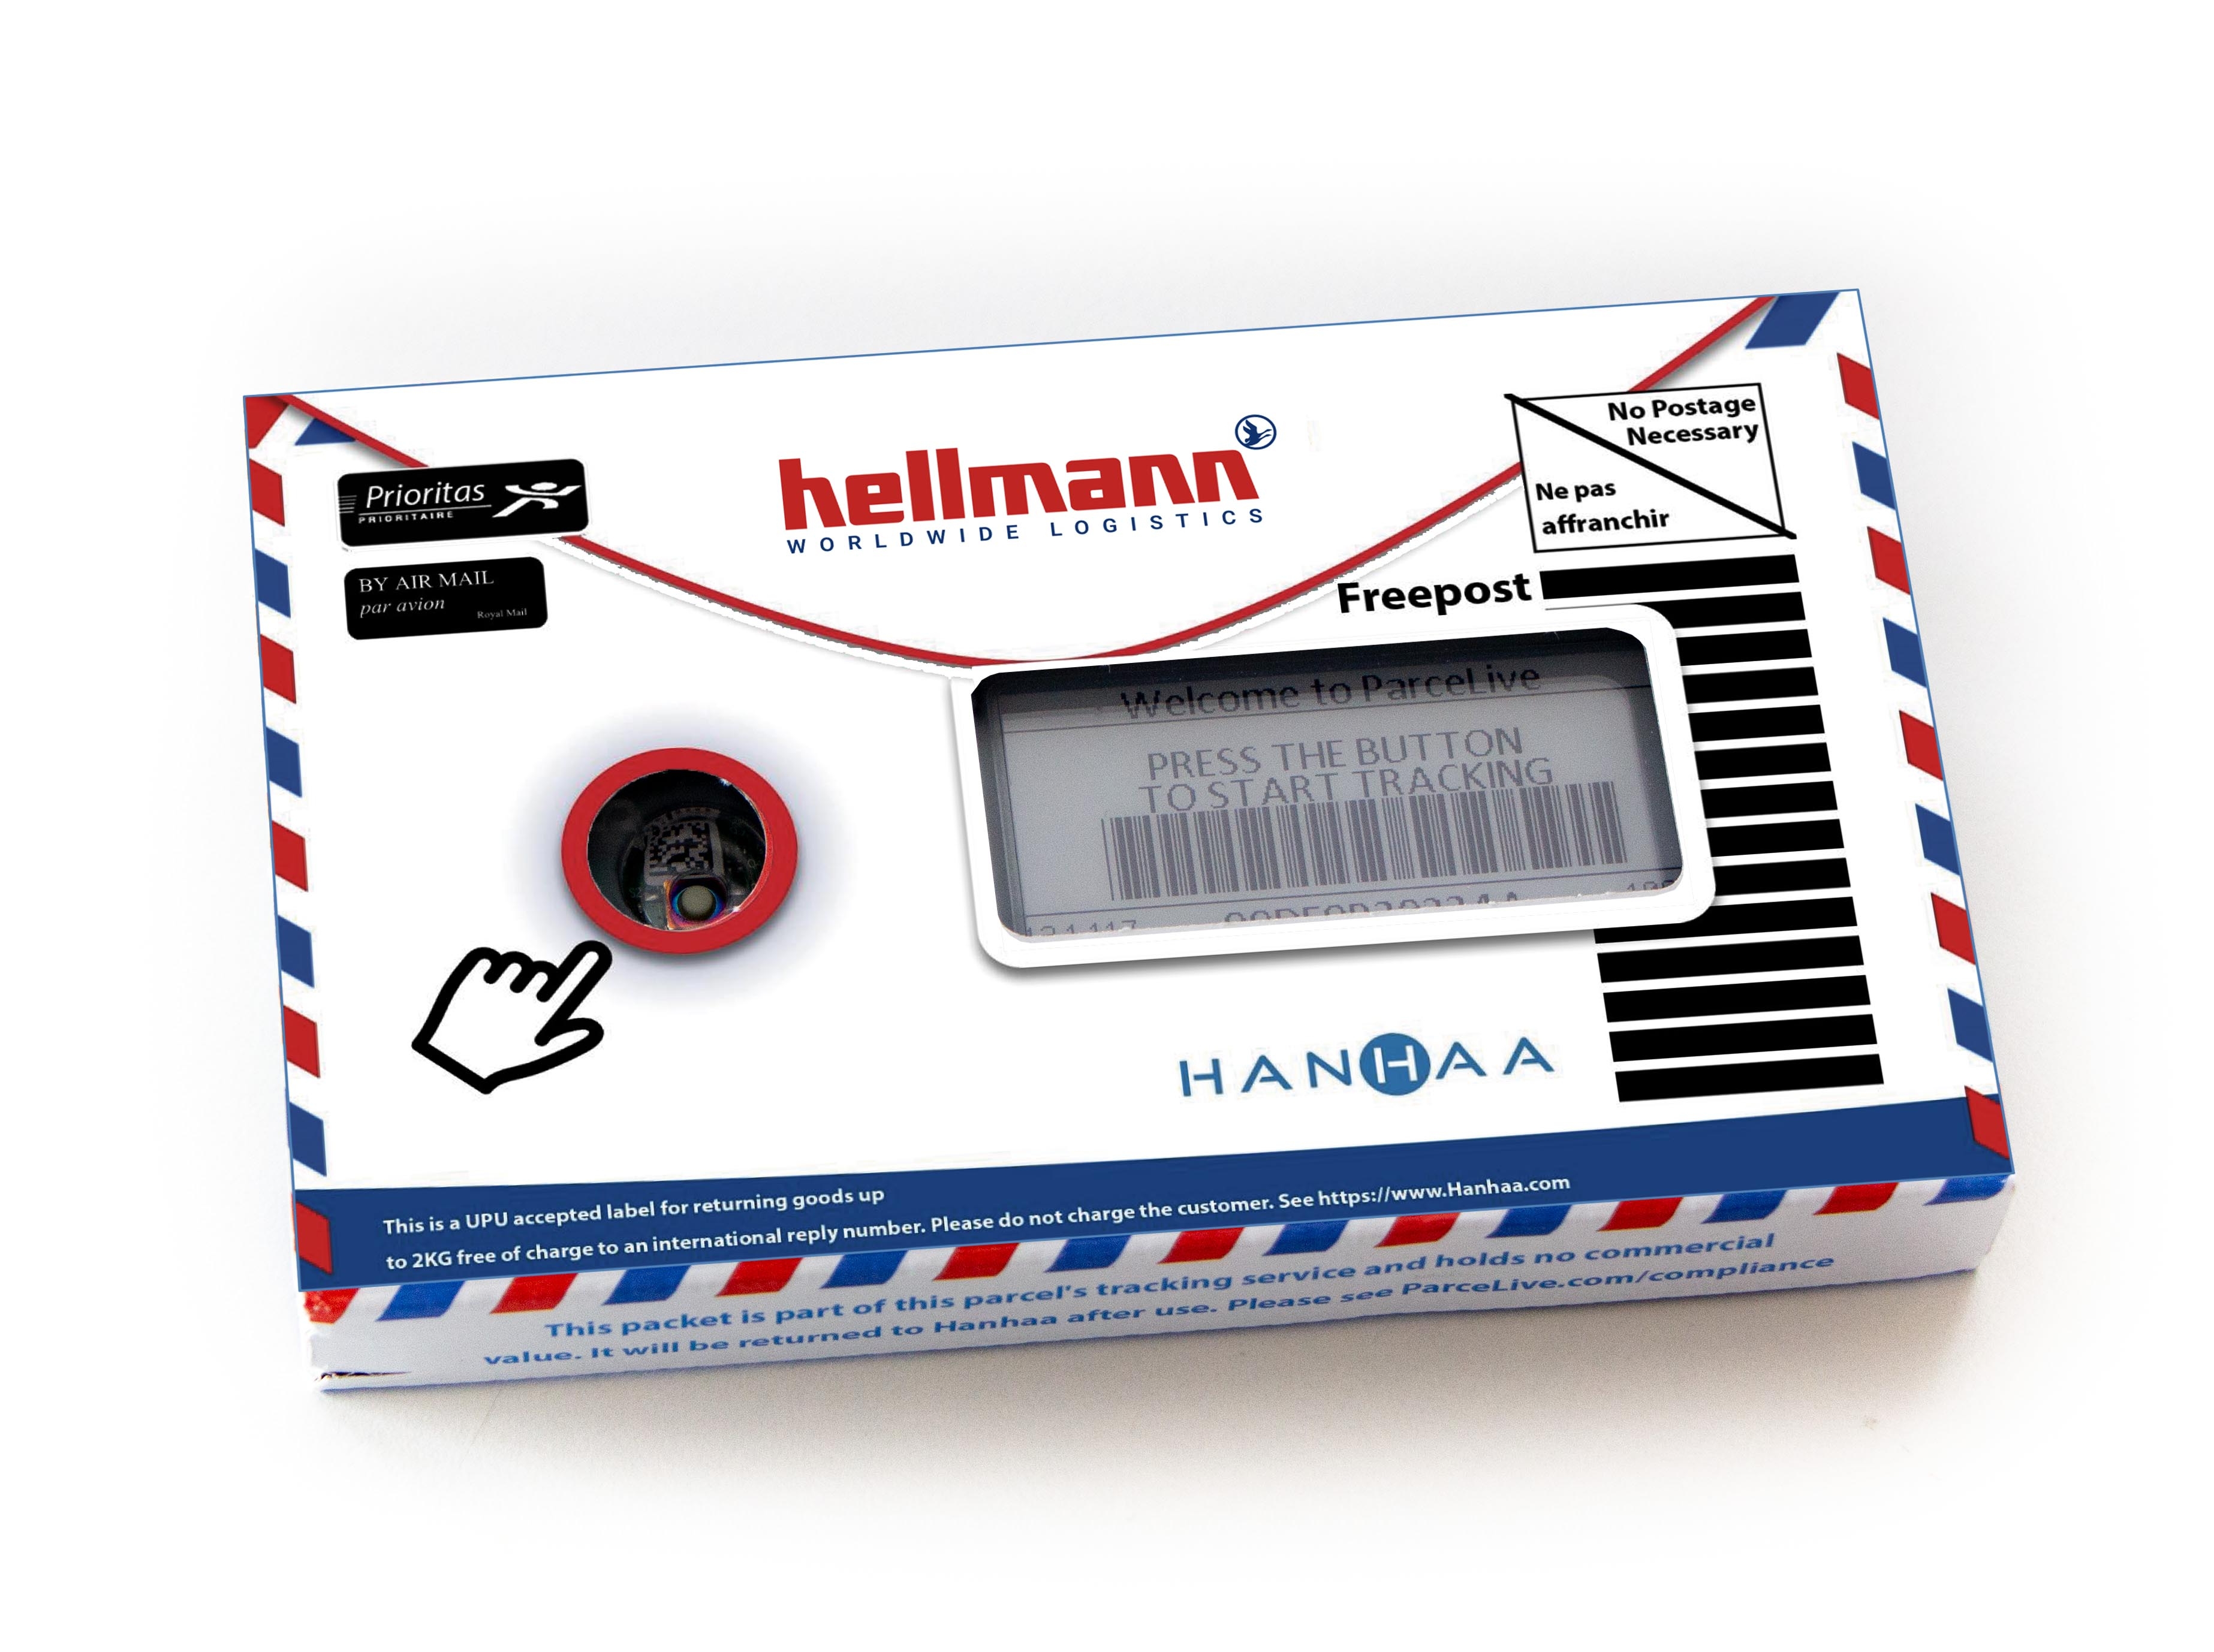 Smart Visibility: Live tracking service by Hellmann